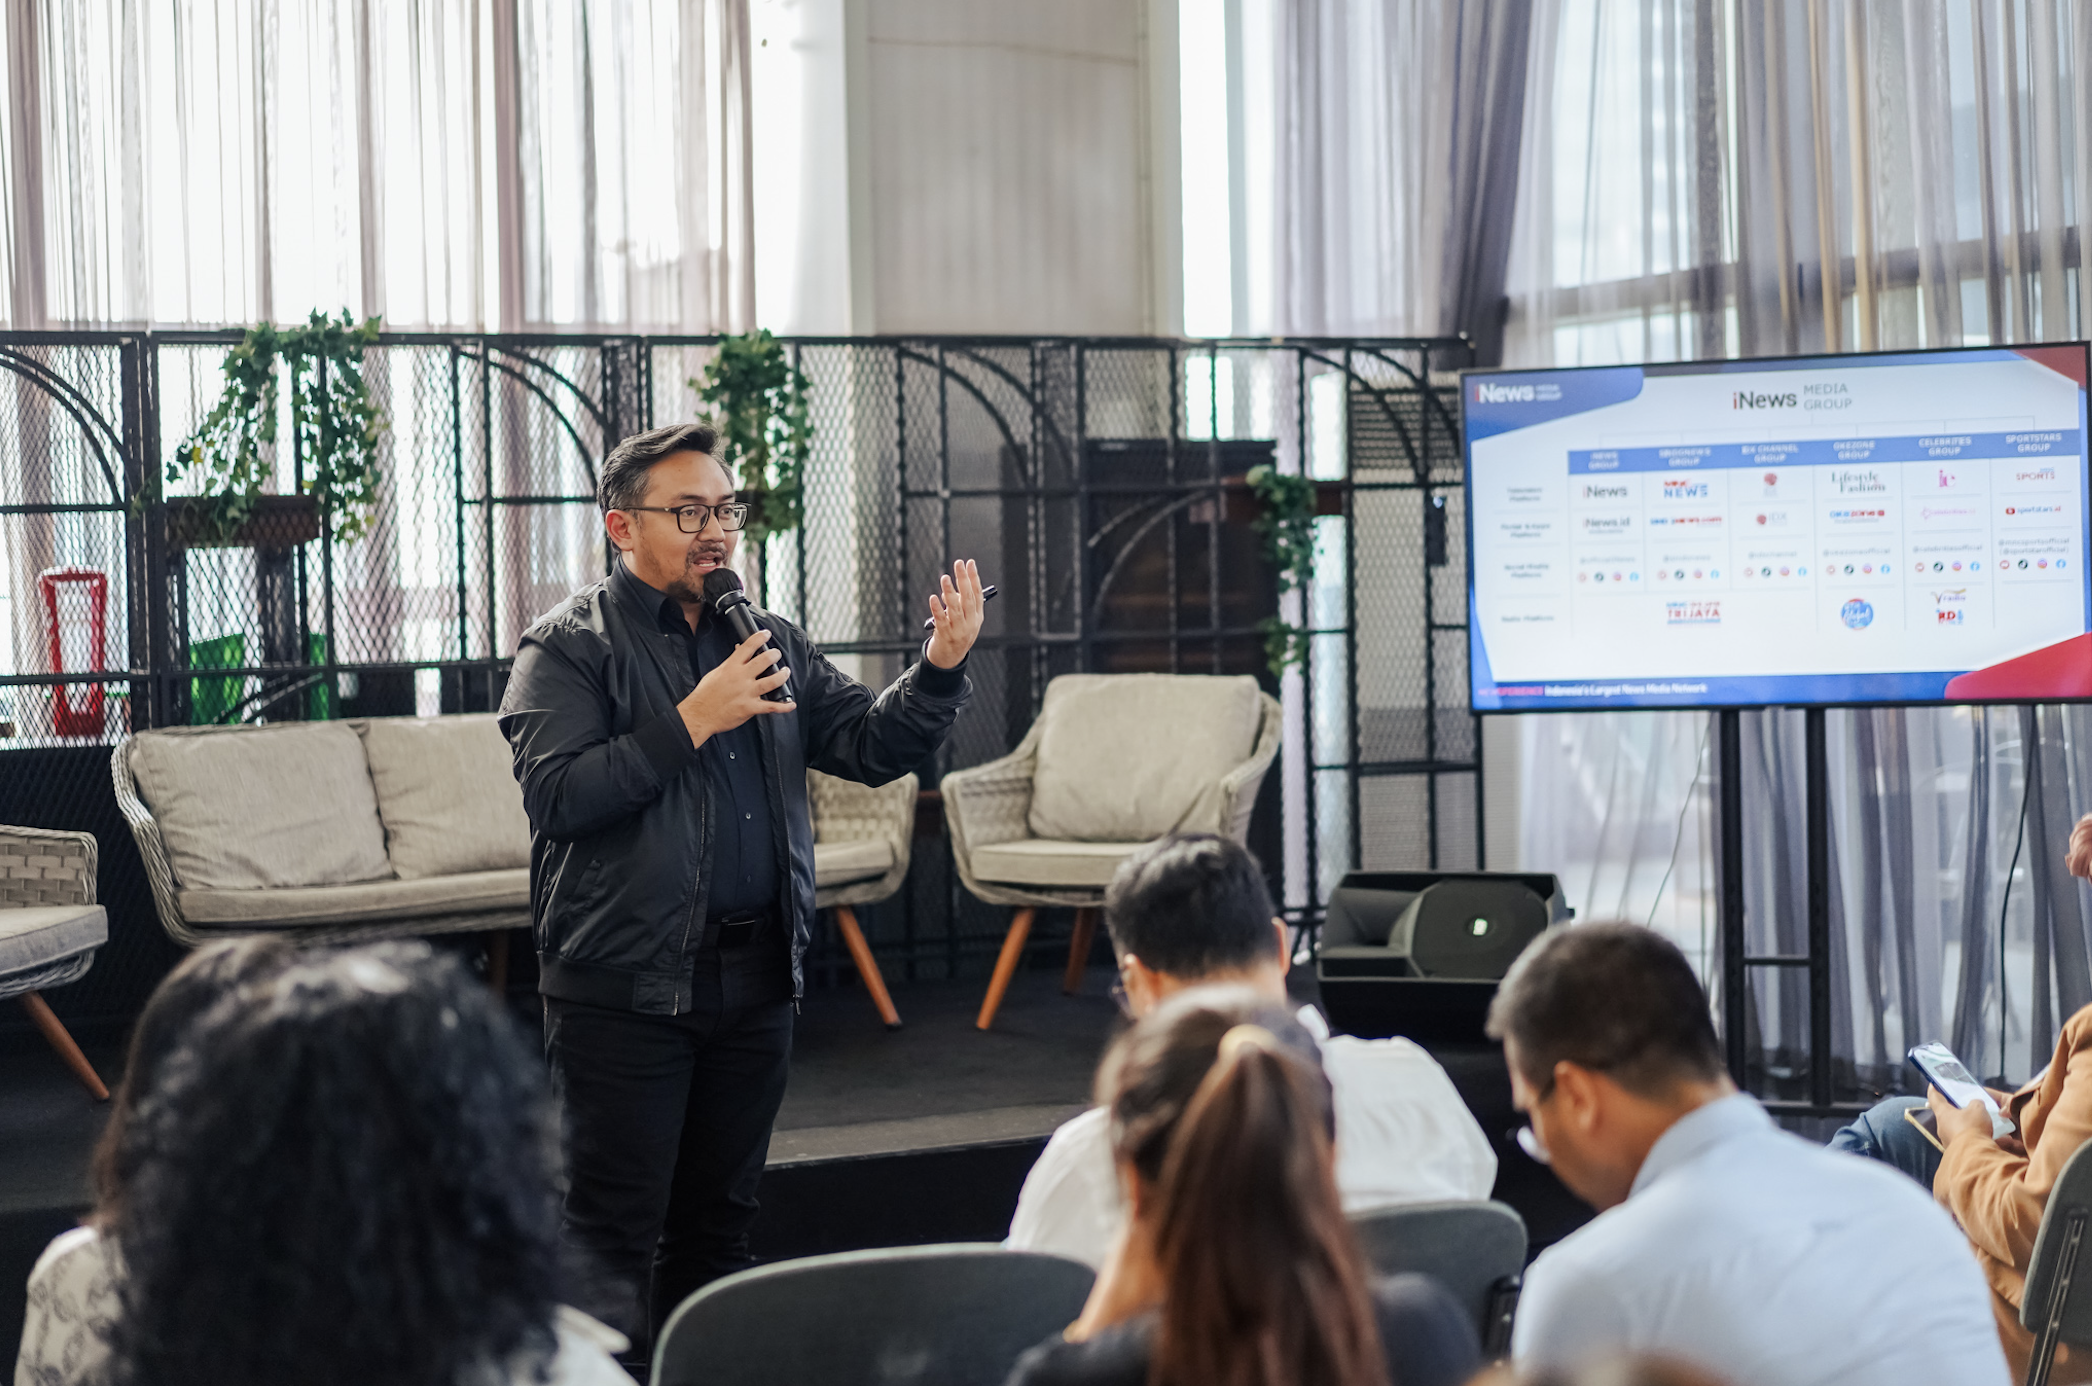 From Media Monitoring to Developing Impactful Content - Key takeaways from the Comms Connect Event in Indonesia